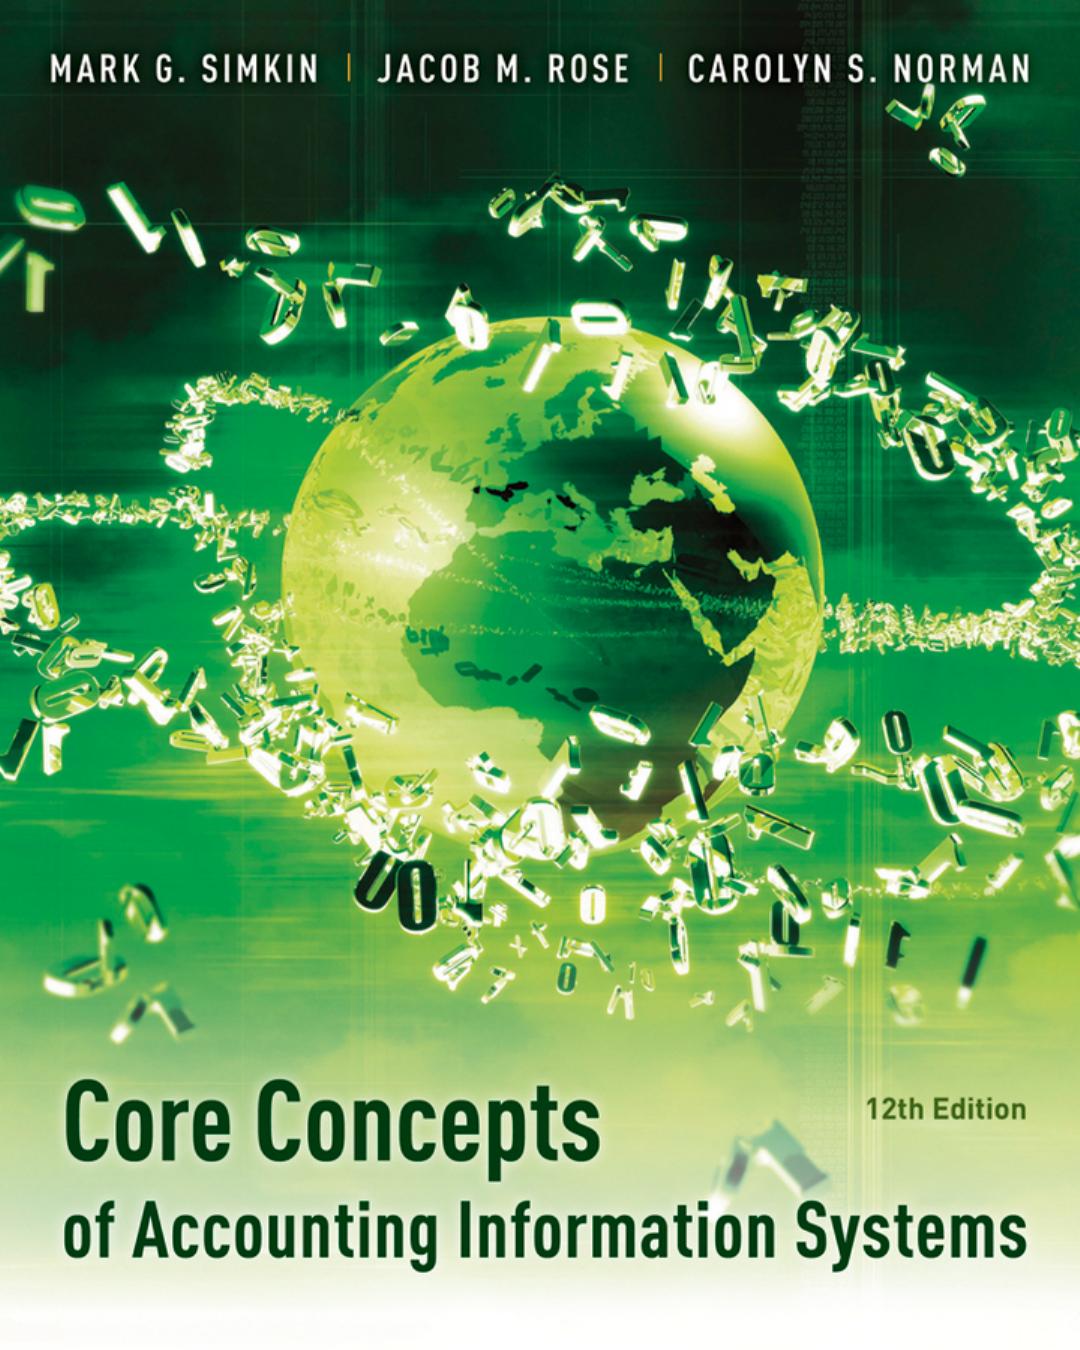 Core concepts of accounting information systems ( PDFDrive ) 12th ed 2012